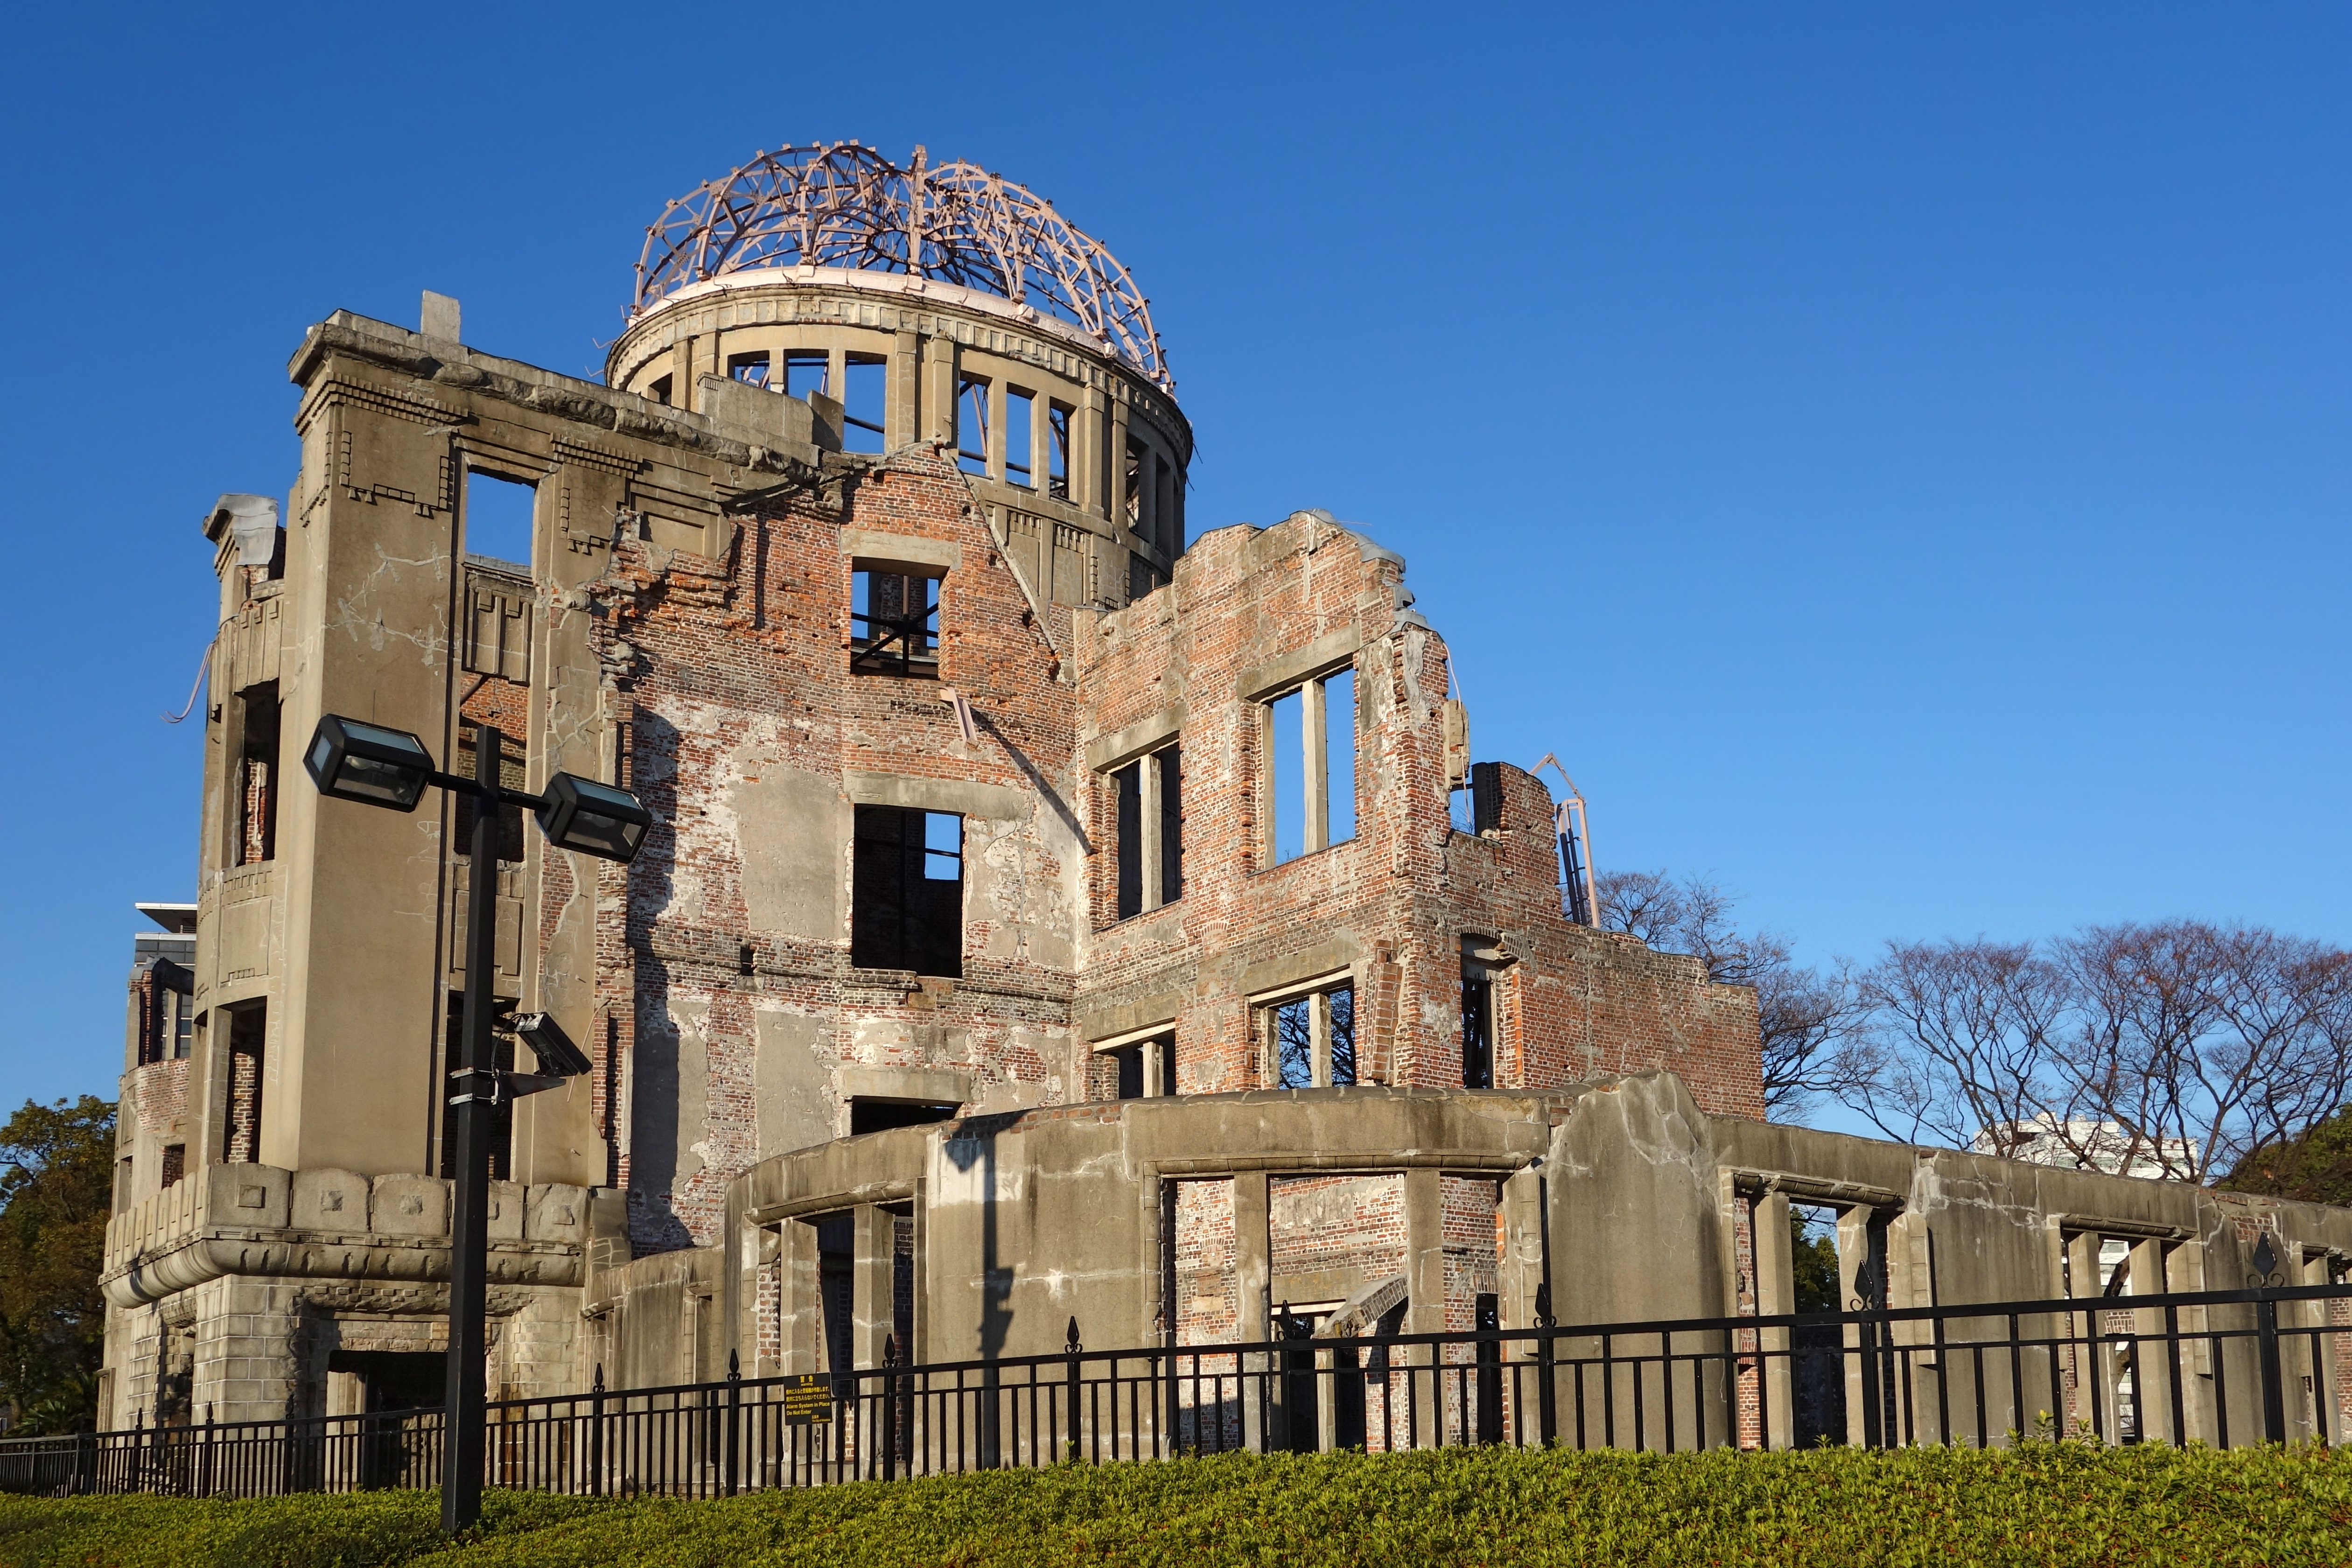 which is better to visit hiroshima or nagasaki